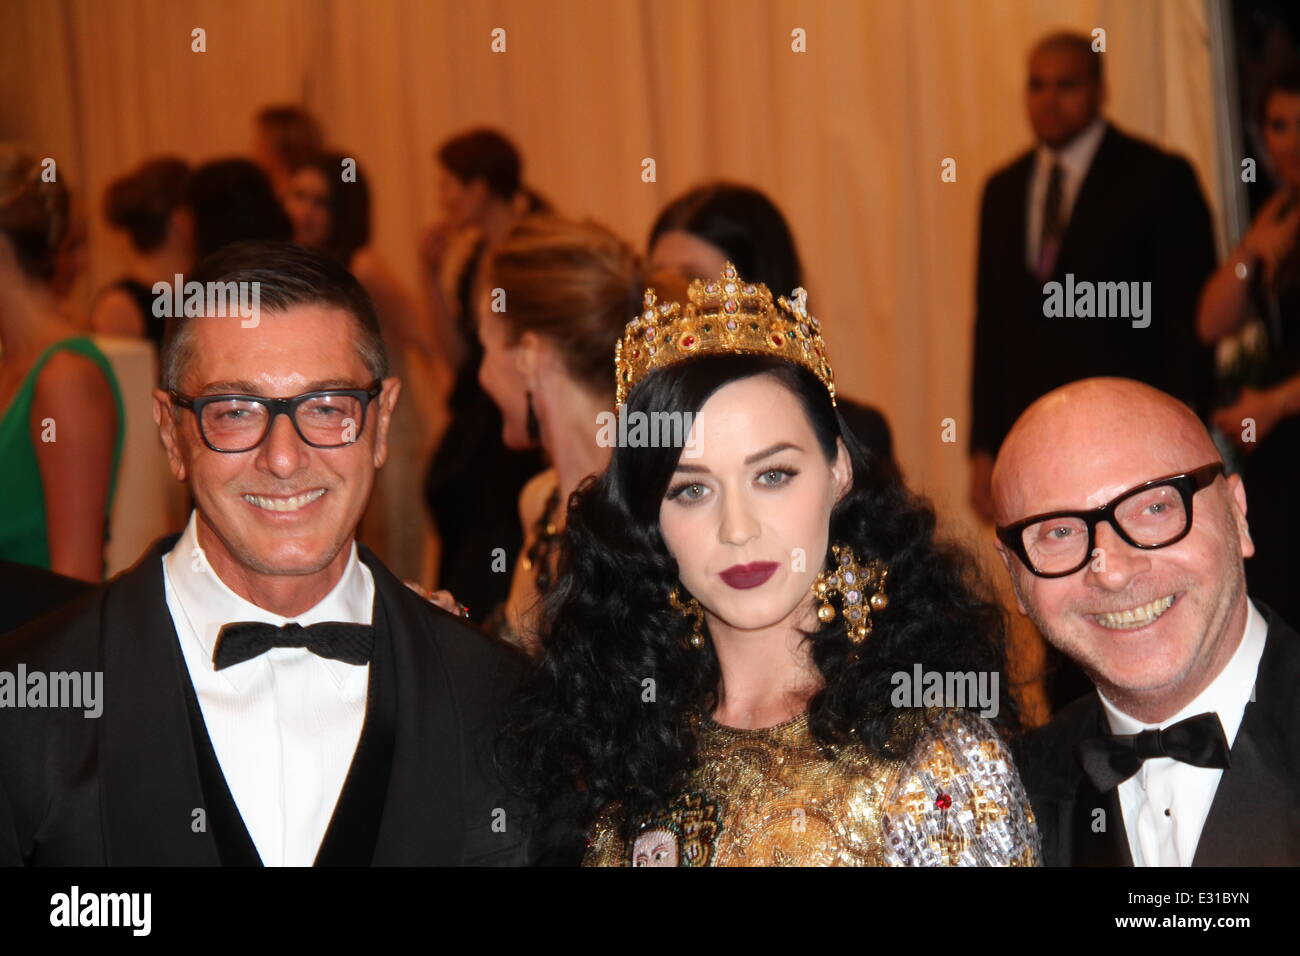 dolce and gabbana founded